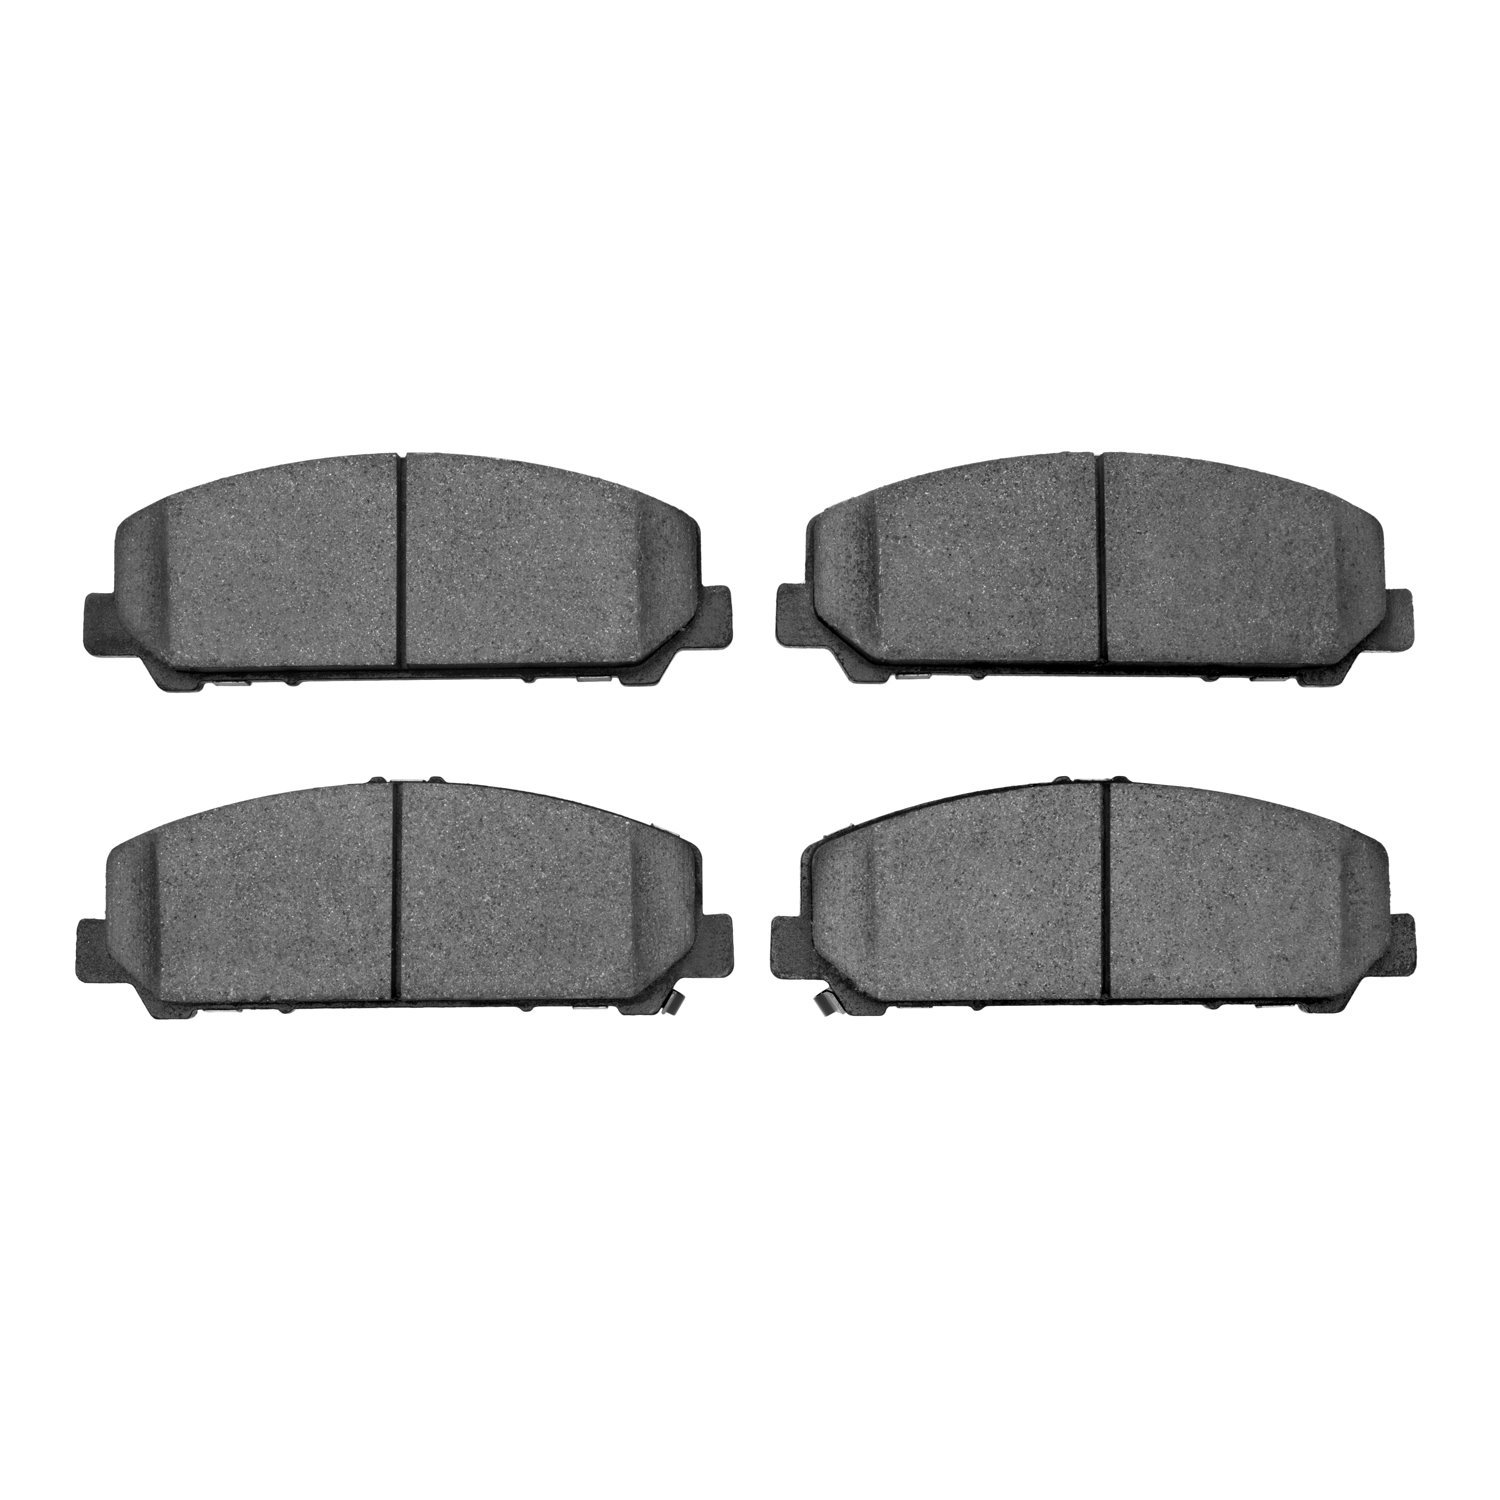 1551-1509-00 5000 Advanced Ceramic Brake Pads, Fits Select Infiniti/Nissan, Position: Front